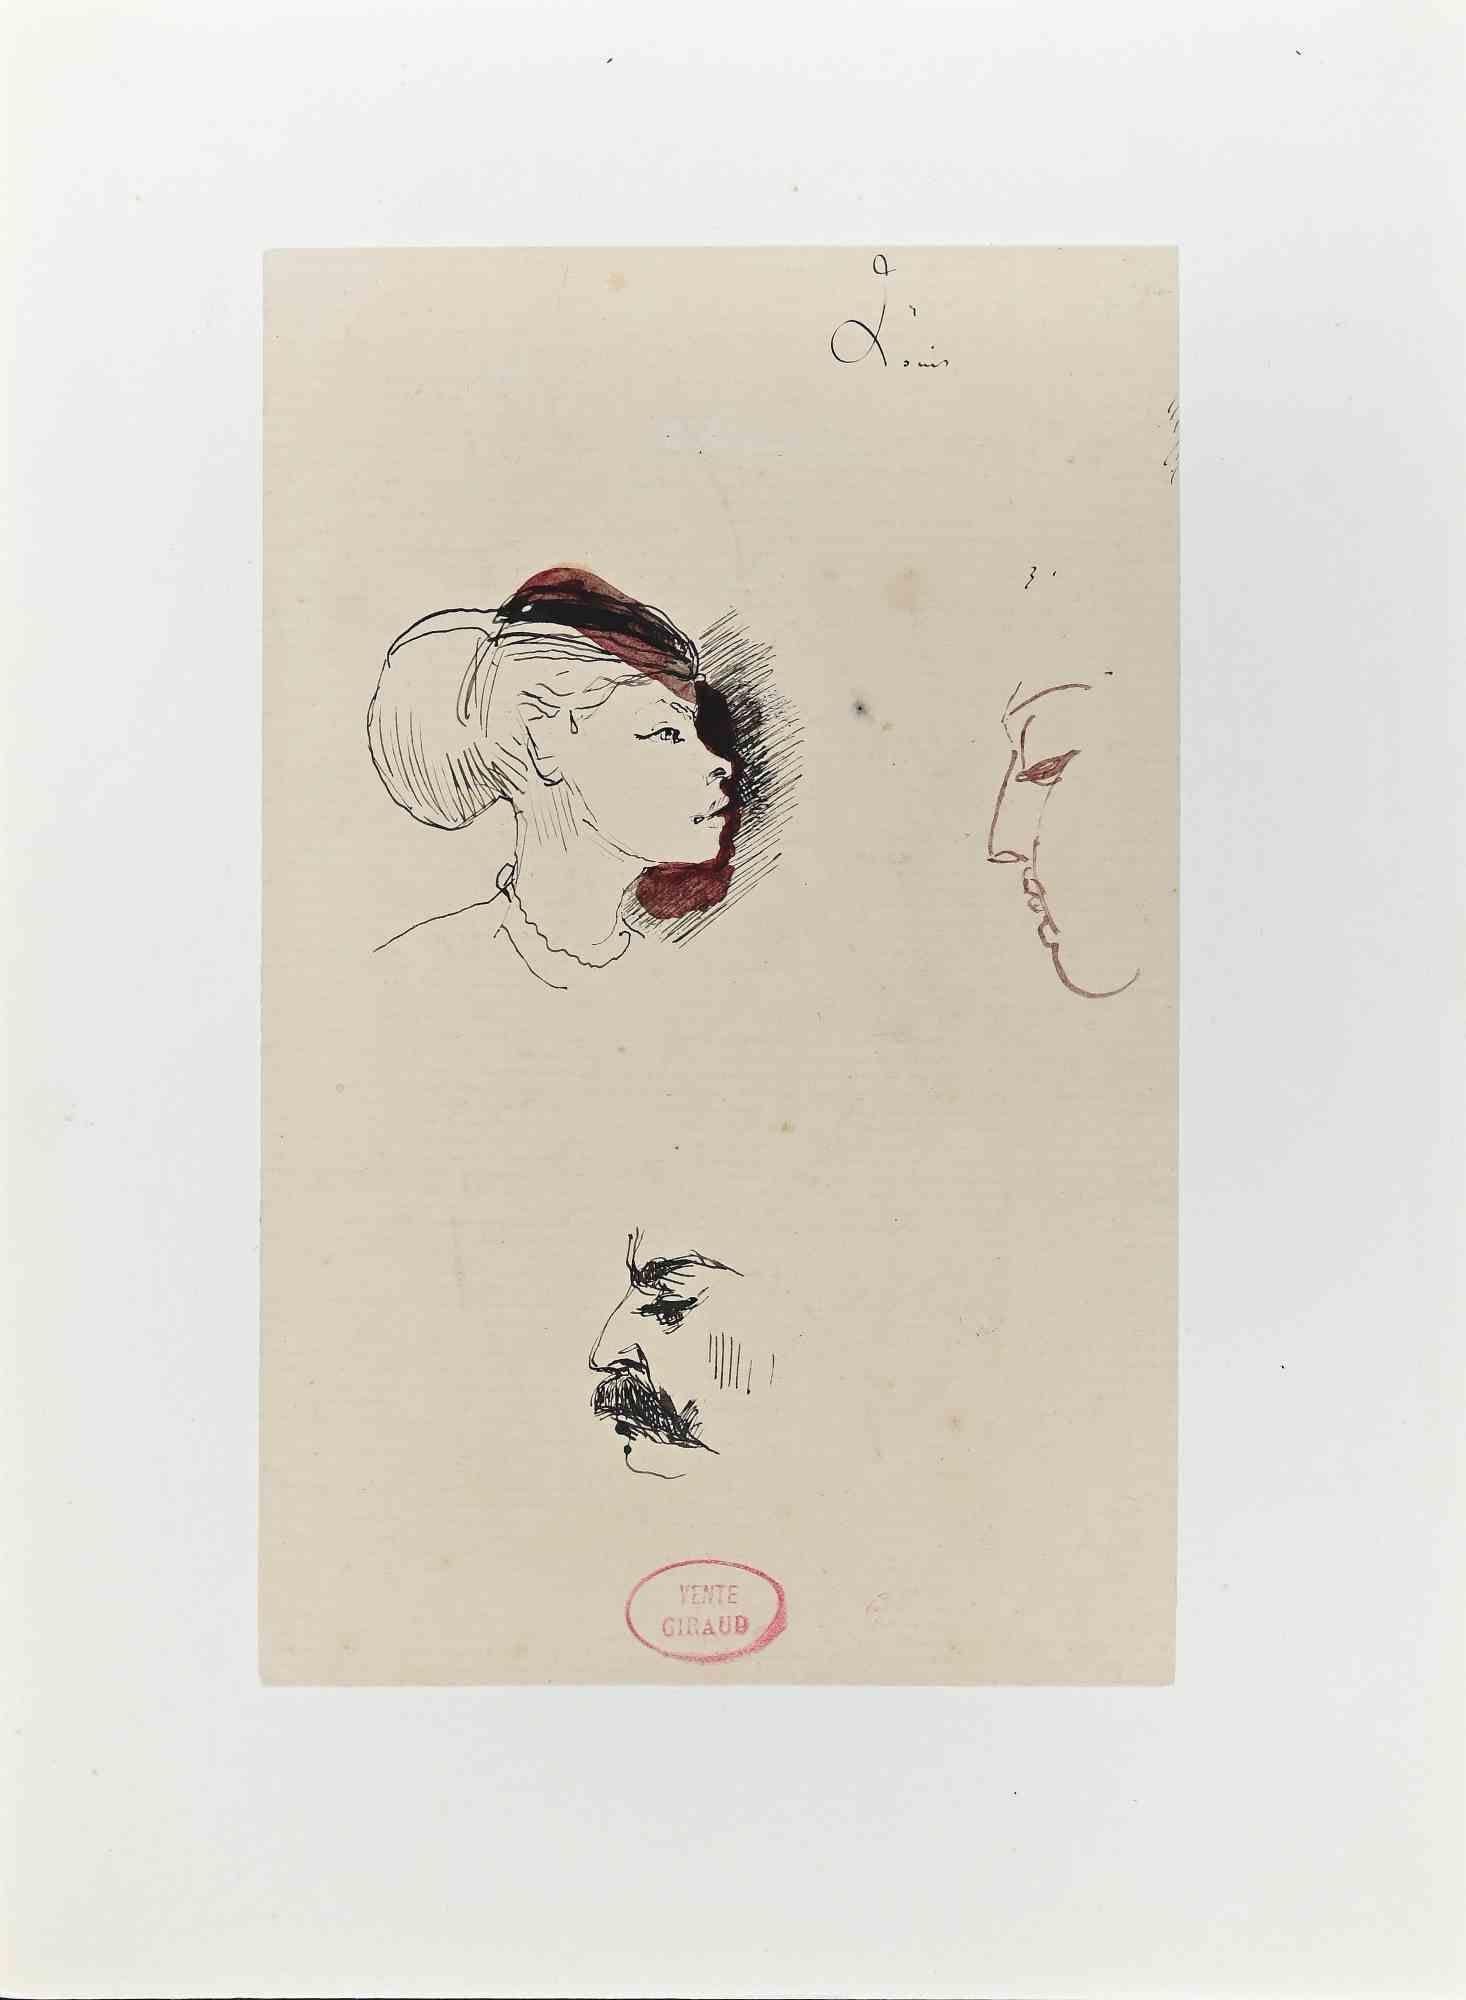 Profiles - Original Ink and watercolor by Eugène Giraud - Late 19th Century